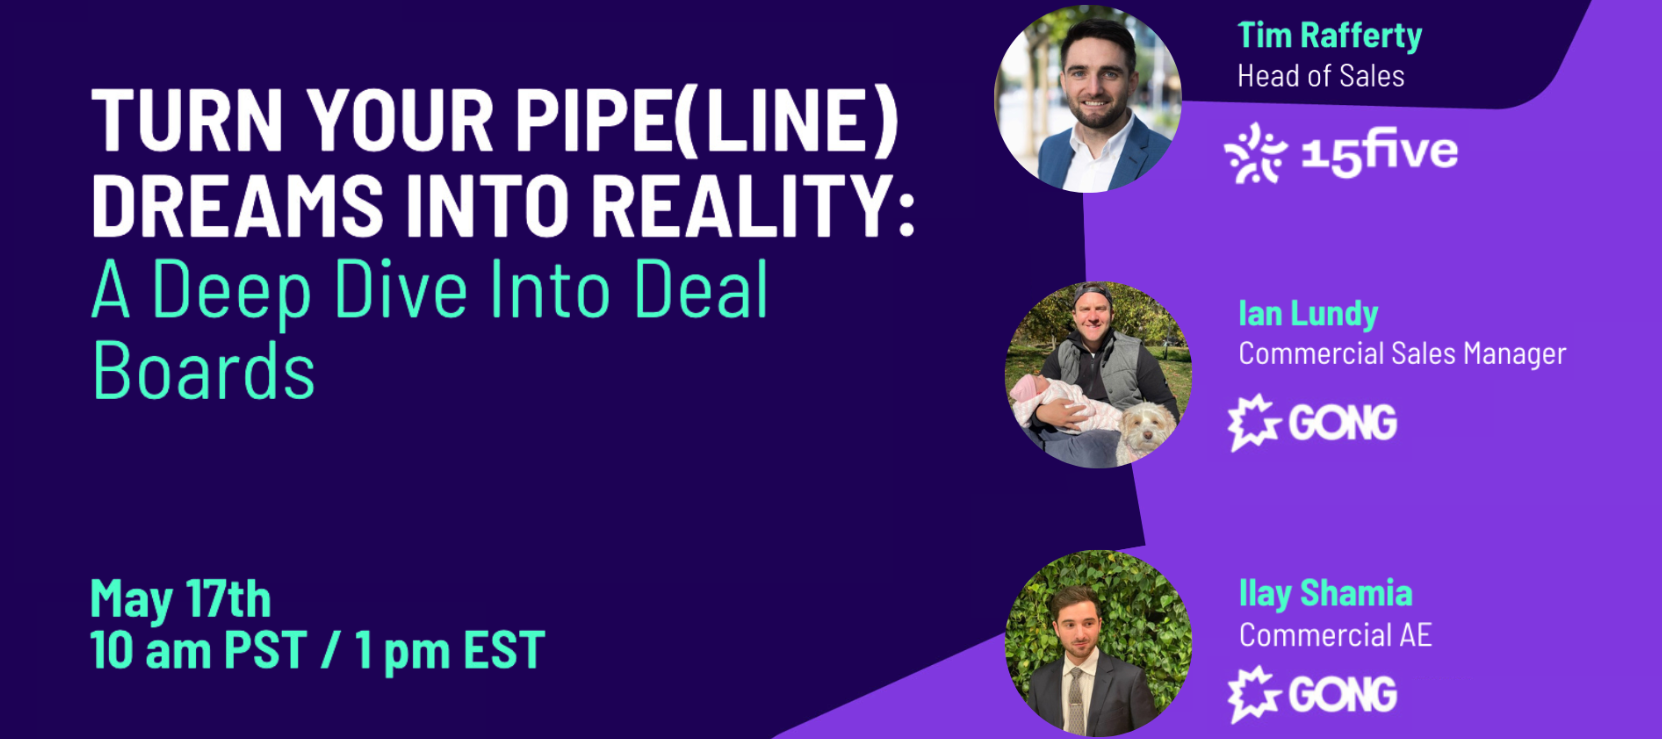 Tips from Customer Insider Event: Turn Your Pipe(line) Dreams Into Reality